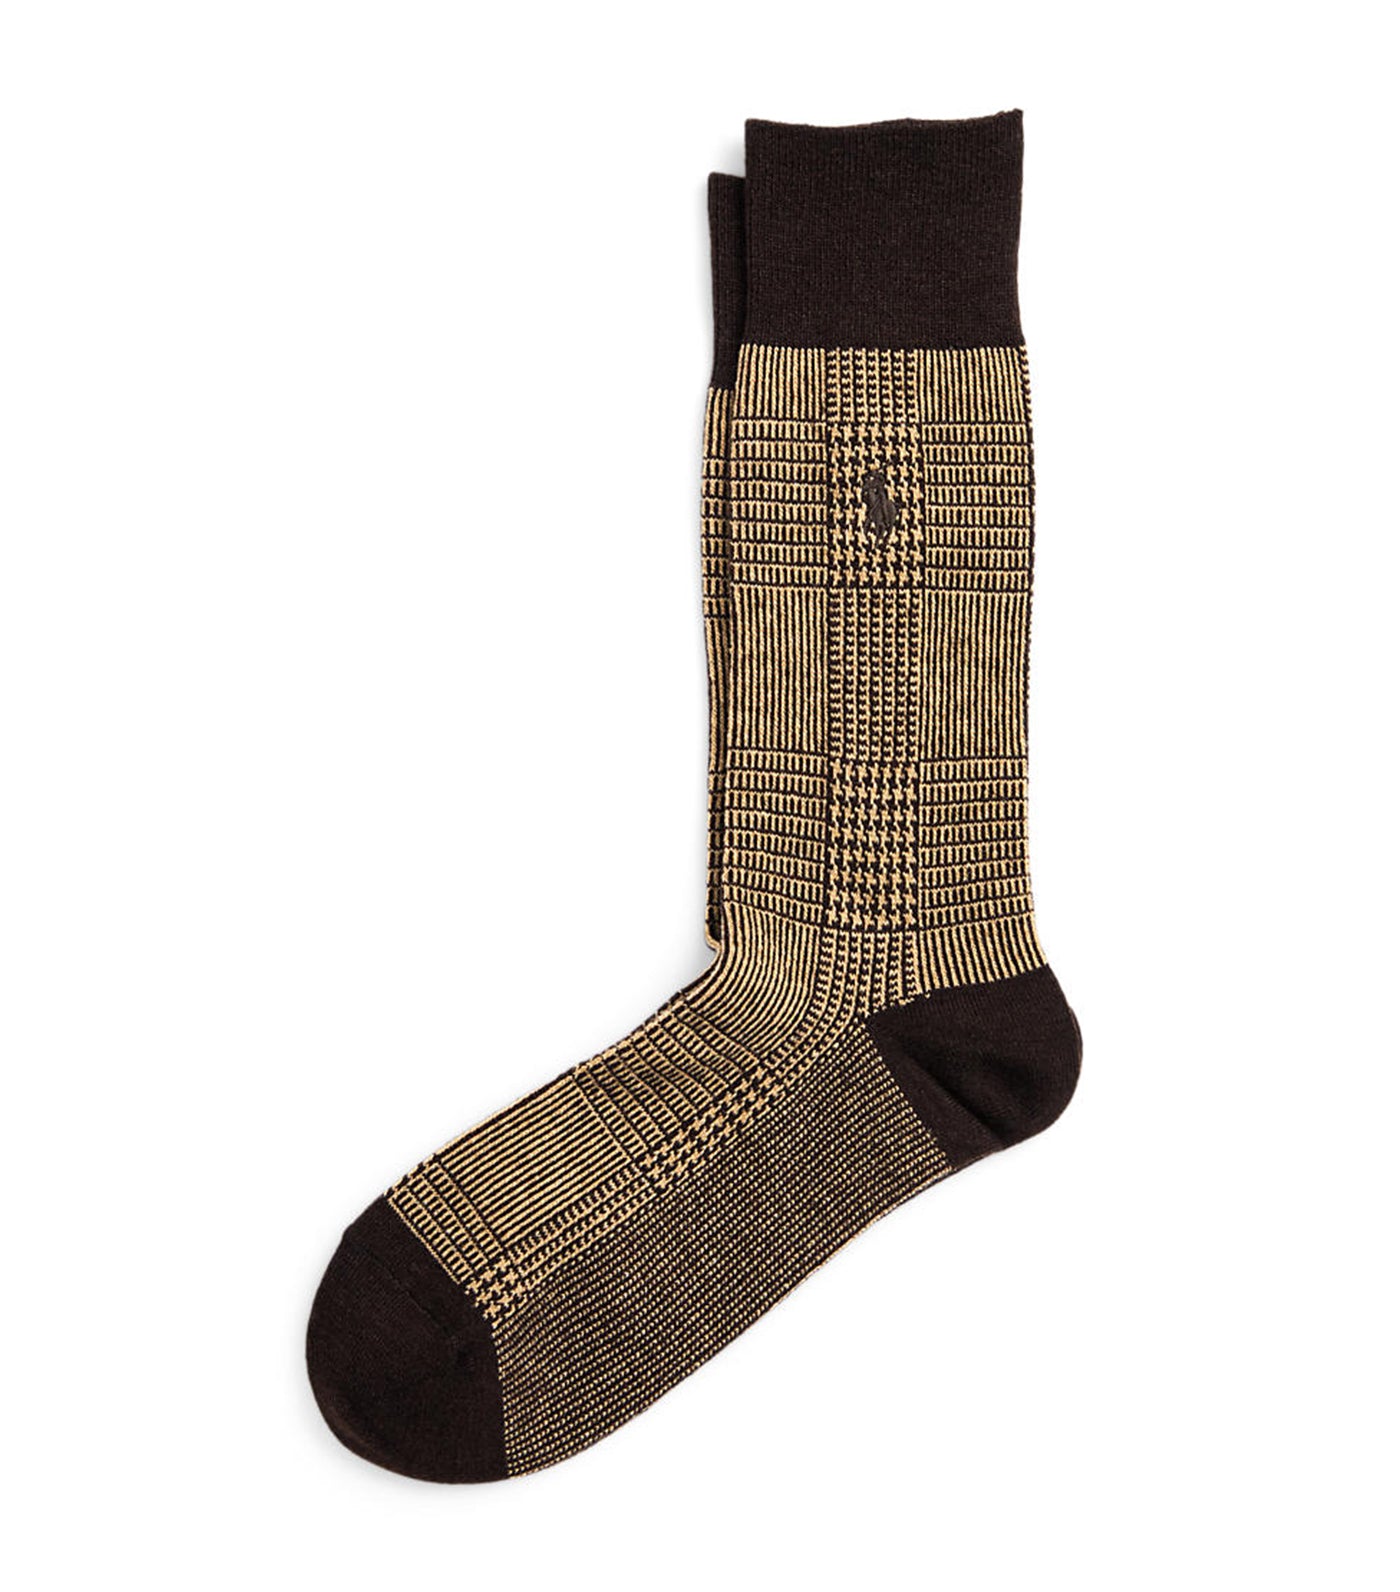 Men's Houndstooth Trouser Socks Mohican Brown